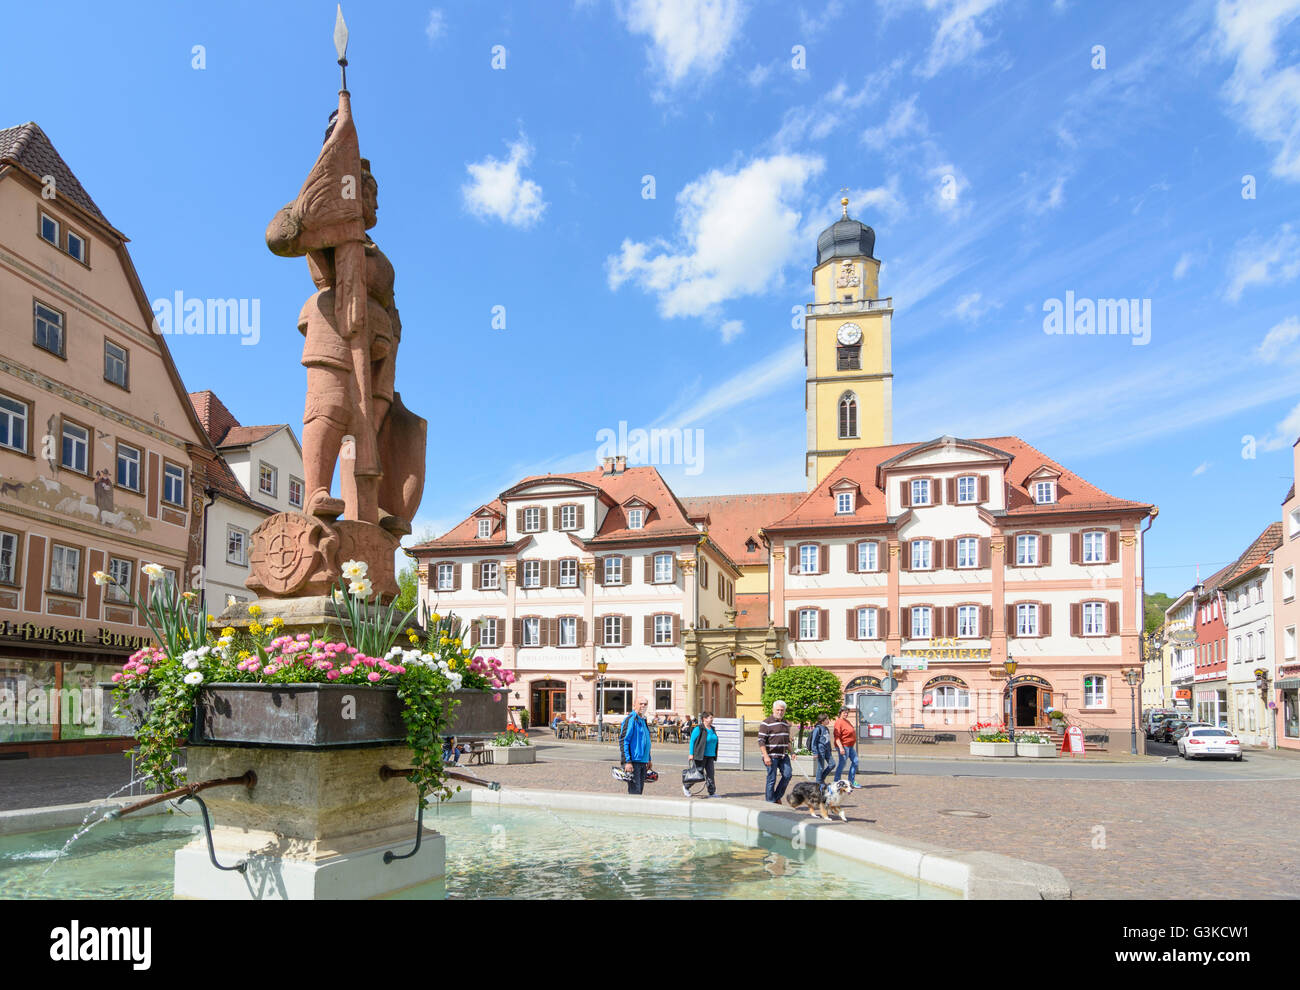 market well with knight on market square with 'twin houses' and Muenster St. Johannes Baptist, Germany, Baden-Württemberg, Taube Stock Photo